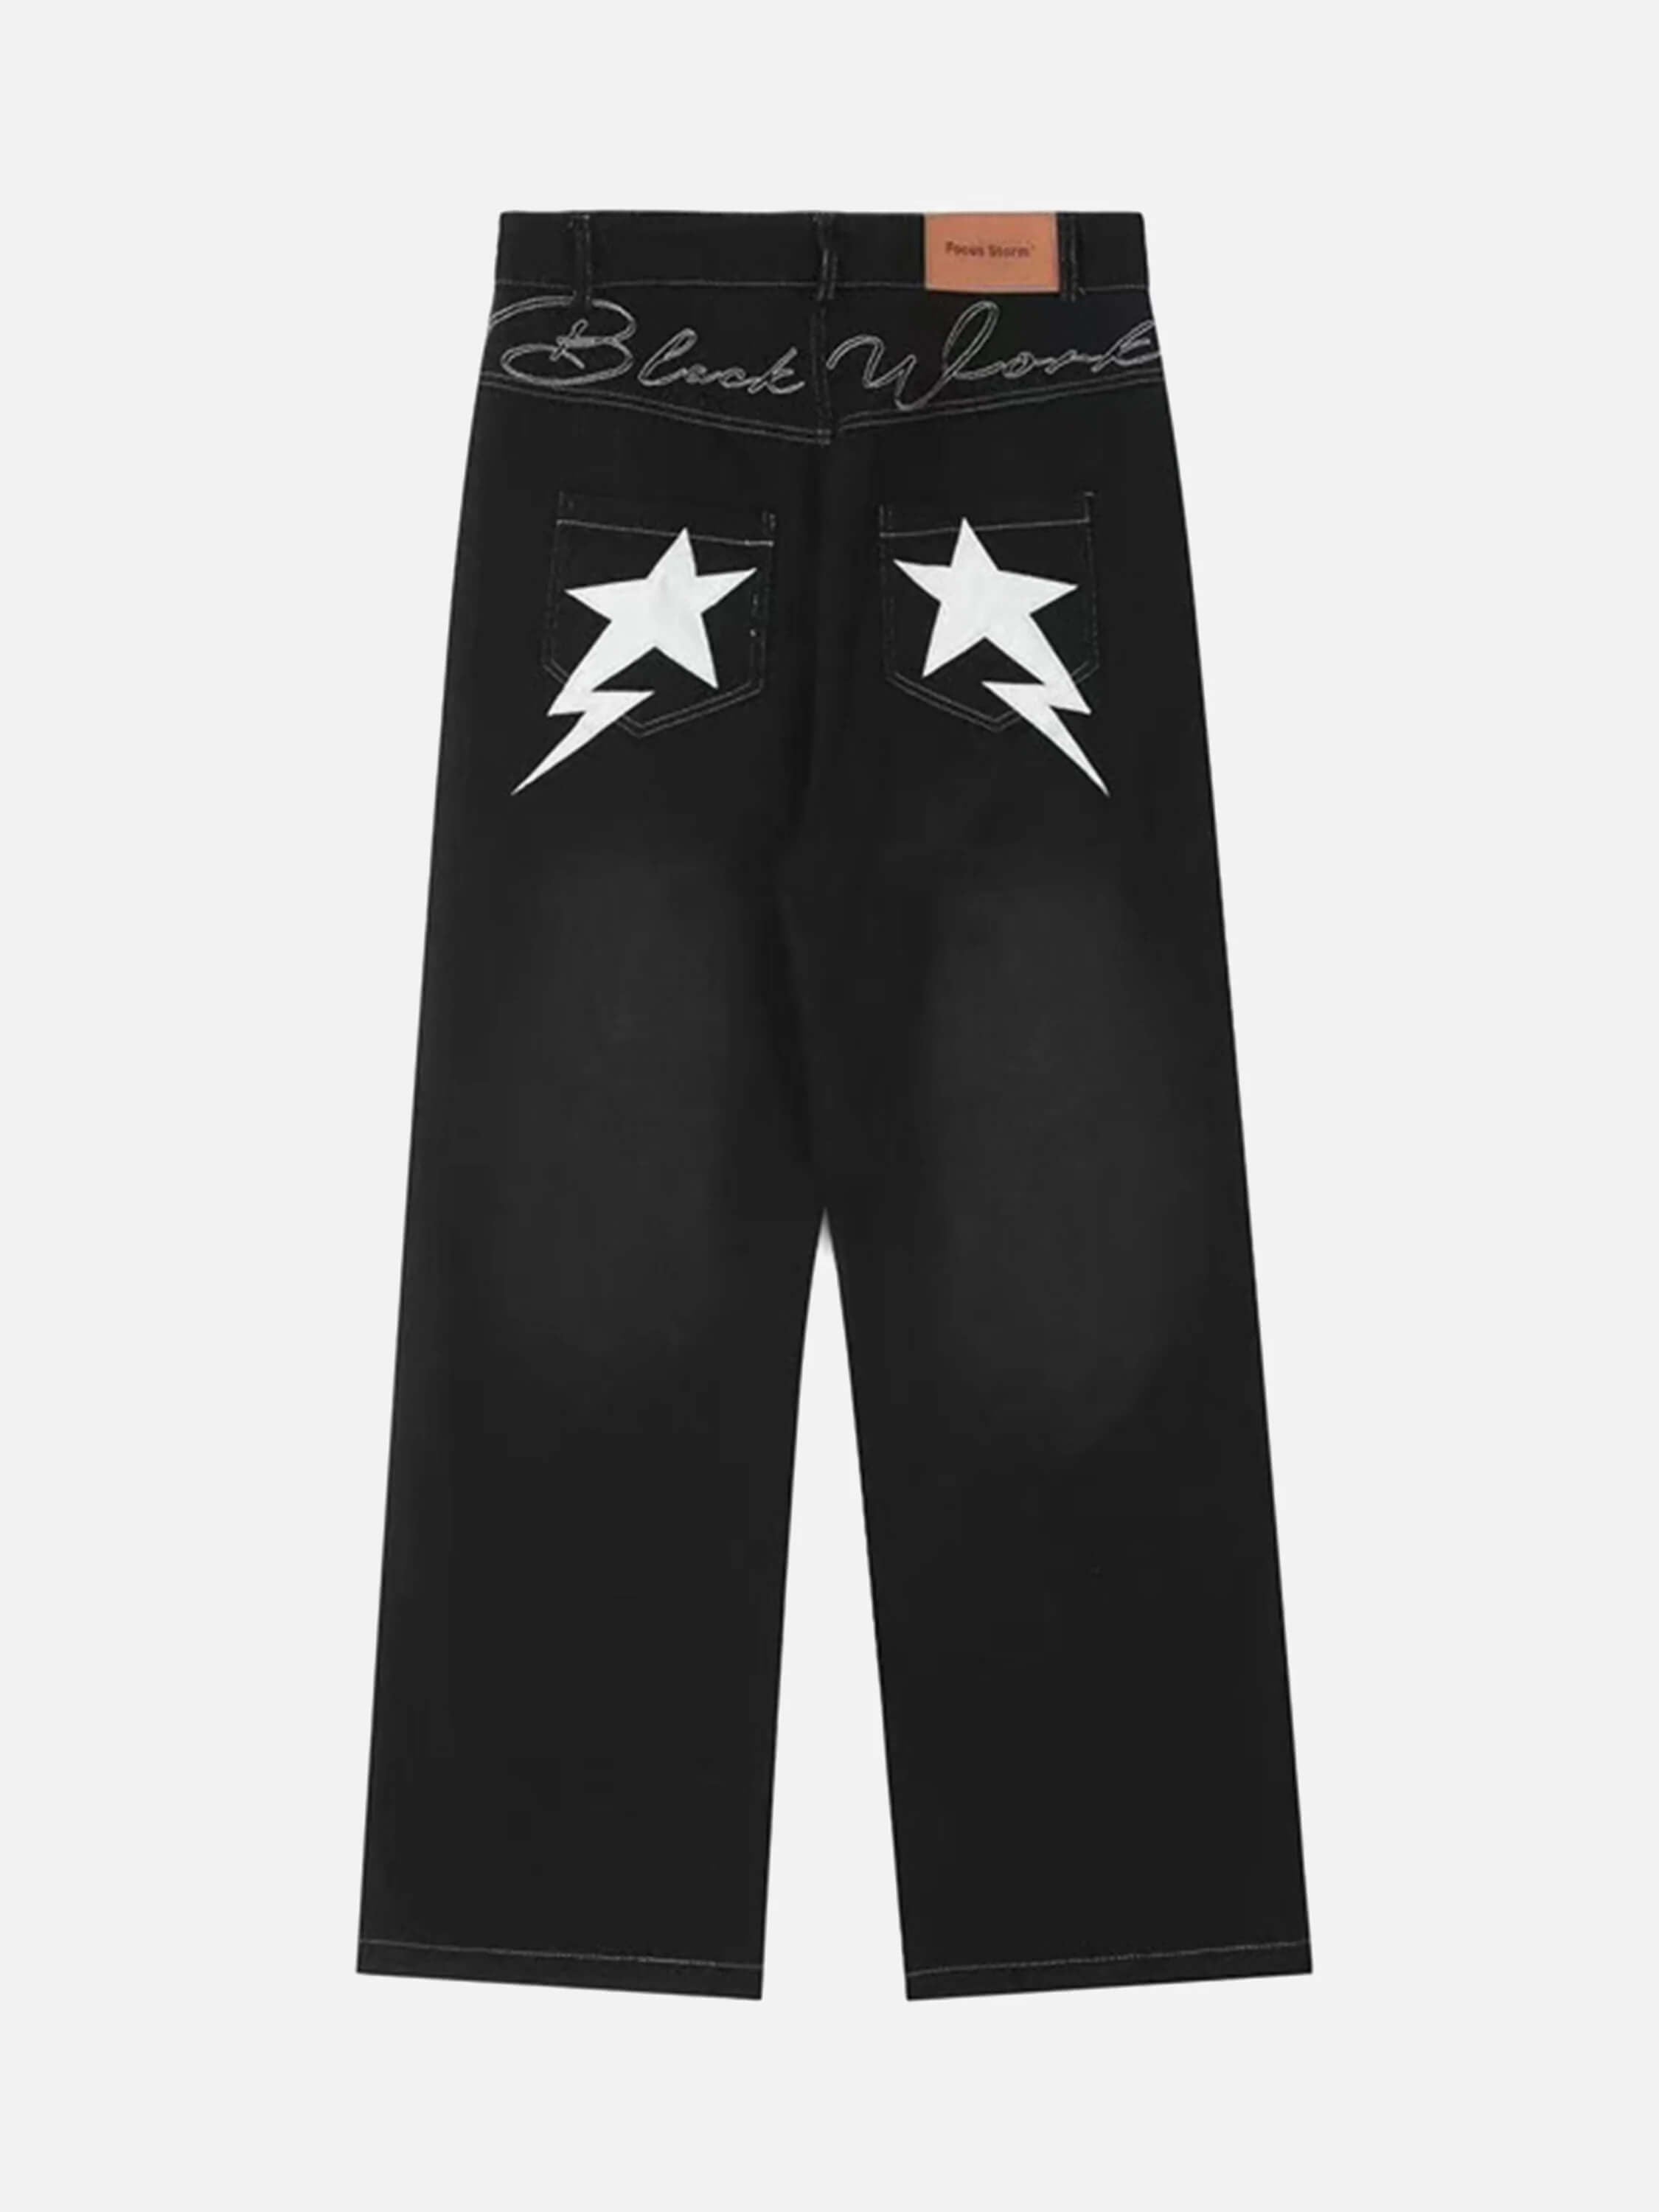 American High Street Star Embroidered Jeans-2216